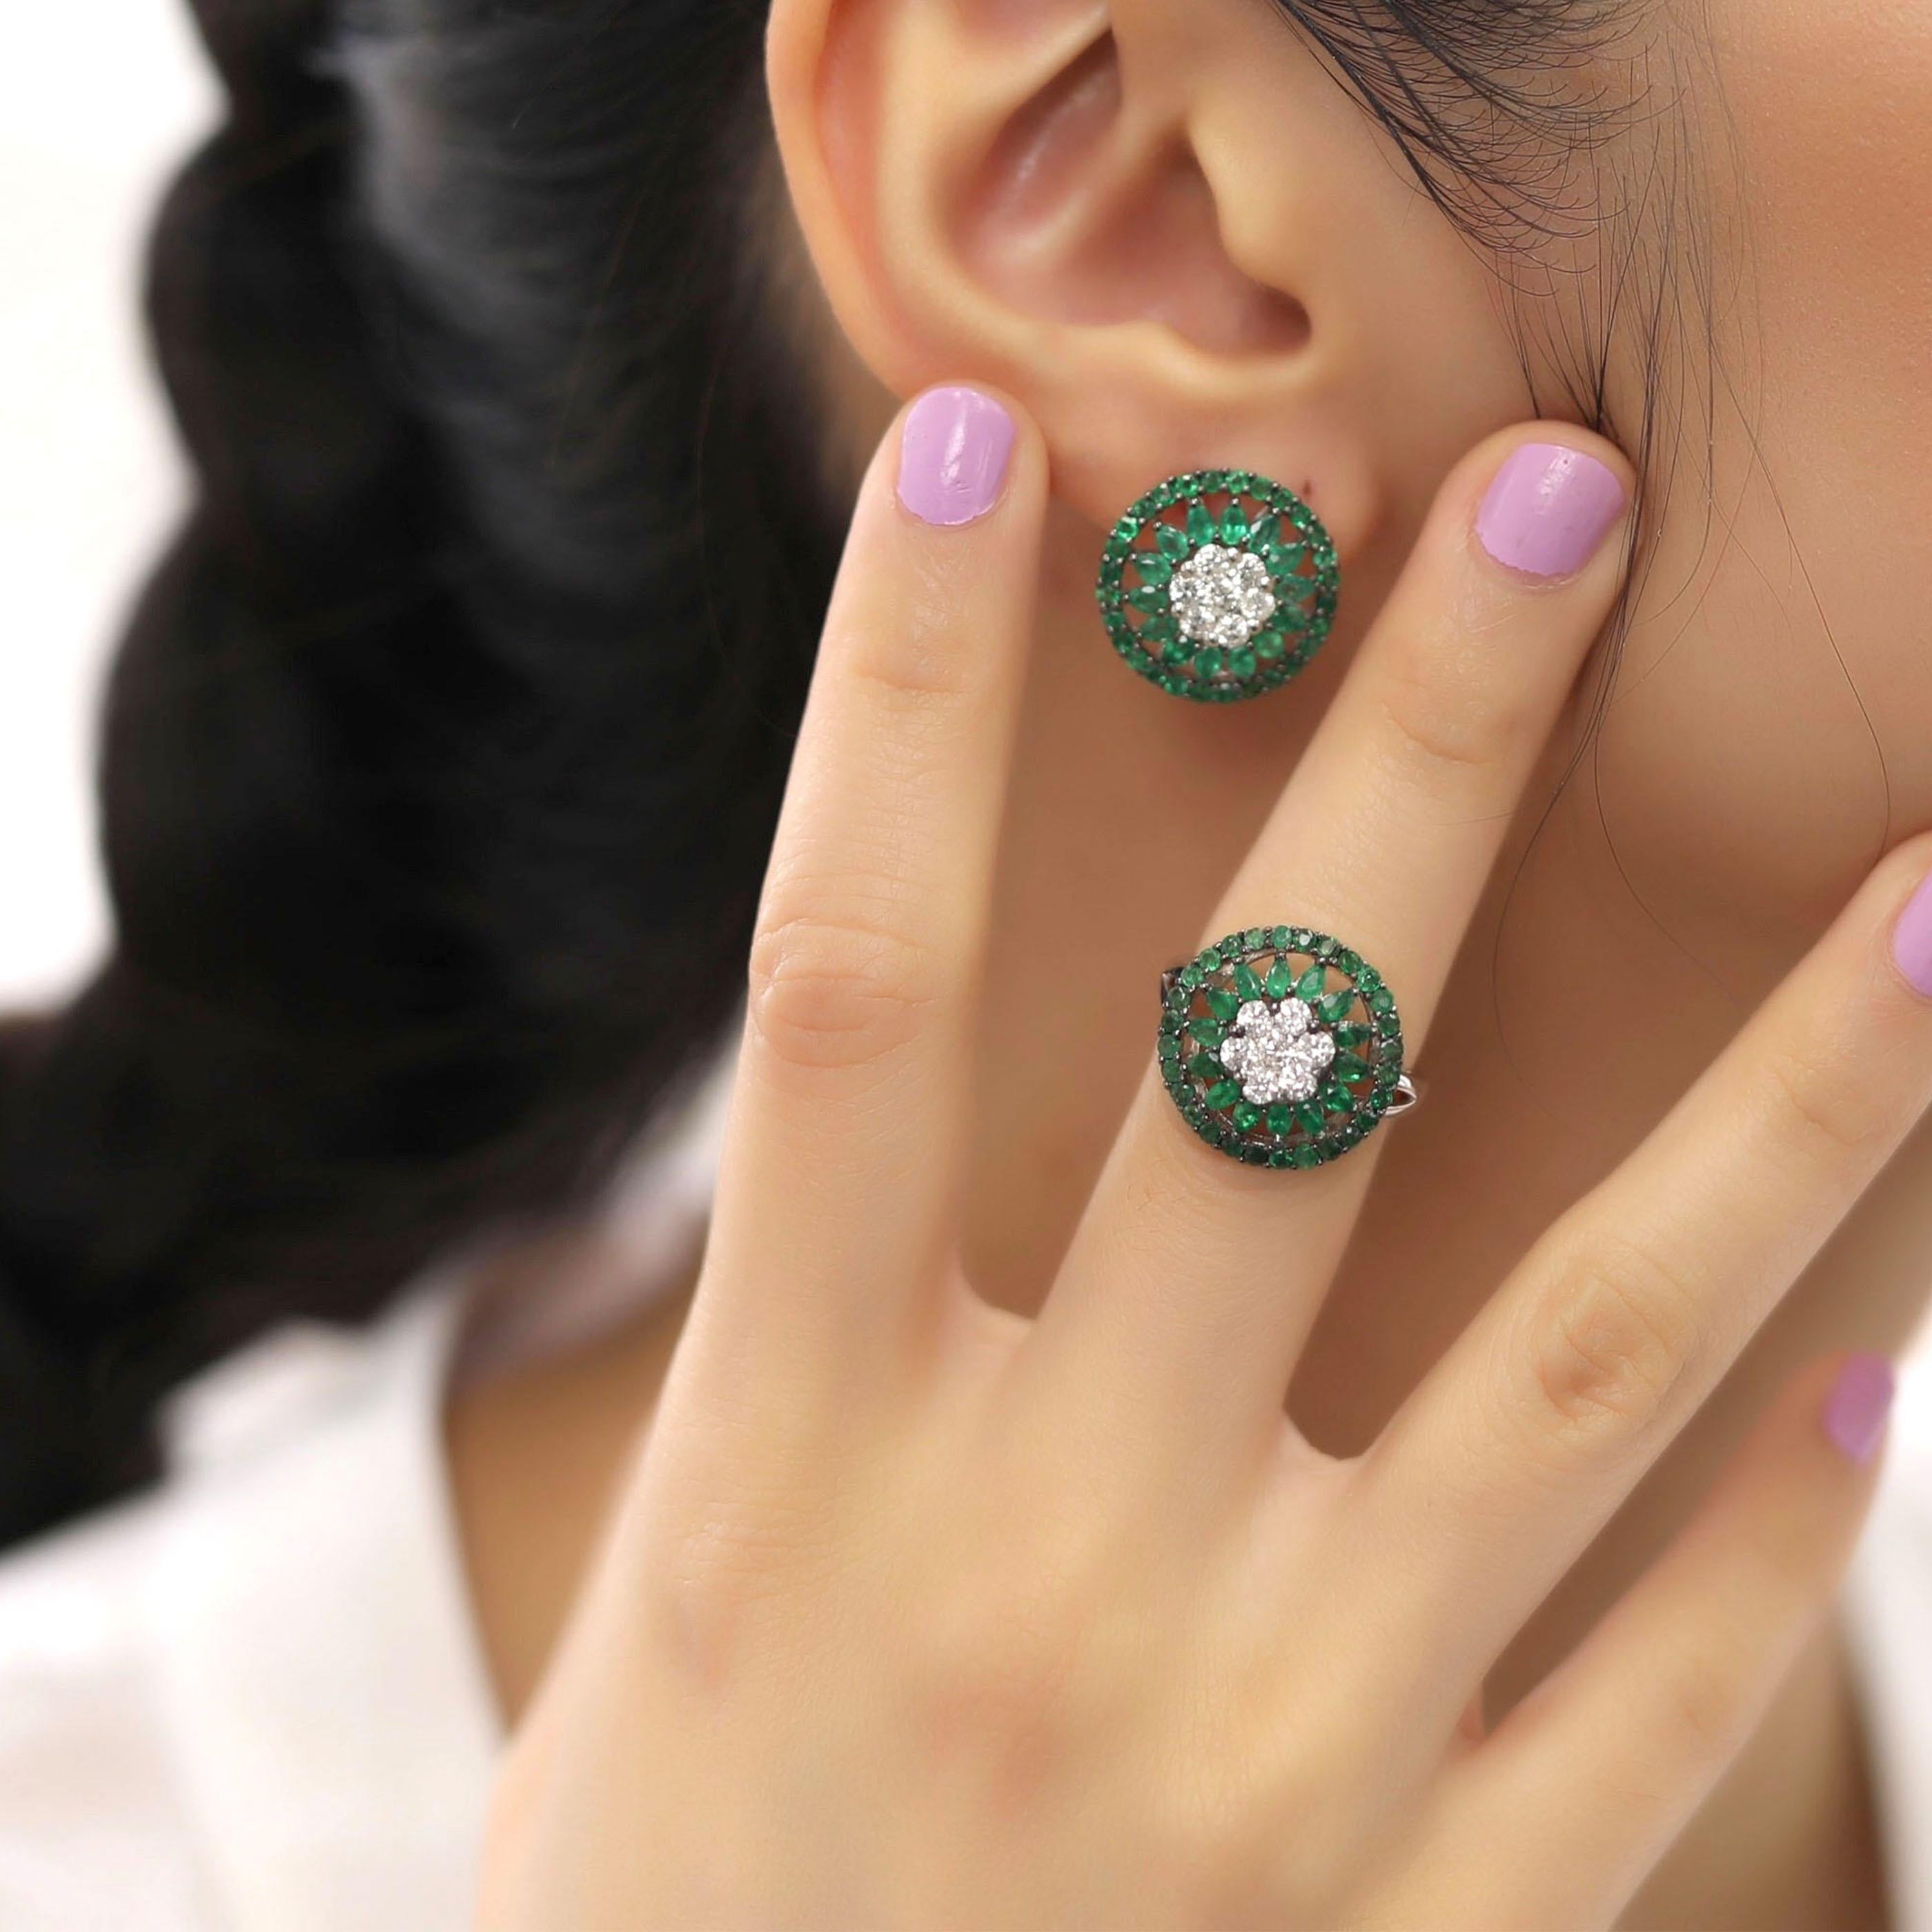 This medium circle flower motif earring and ring set is crafted in 18-karat white gold, weighing approximately 1.44 total carats of SI-H Quality white diamonds and 4.00 total carats of emerald stones. The ring is comfortable and can be sized 